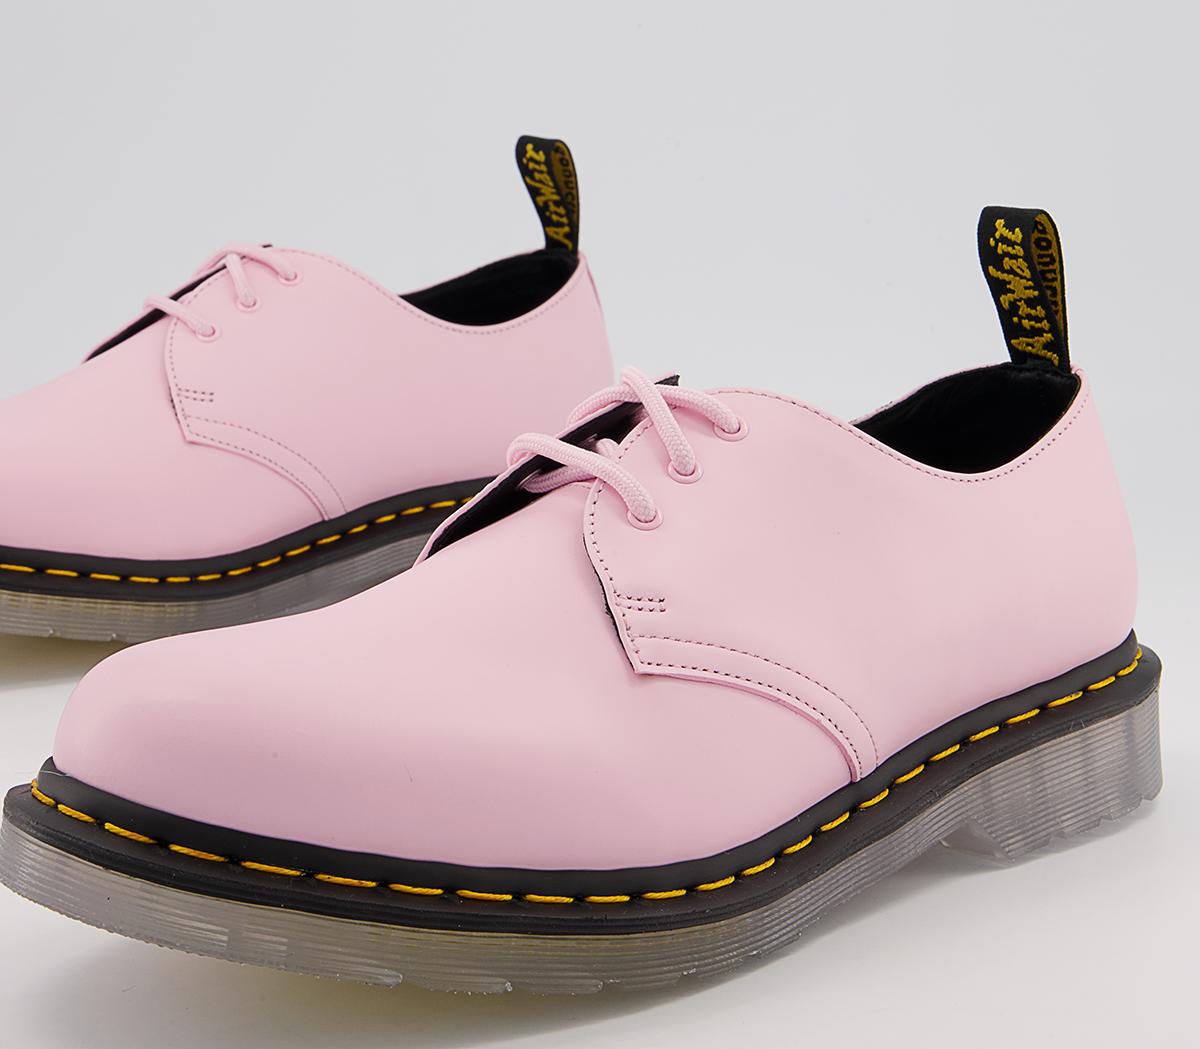 Dr. Martens 1461 Ice 3 Eye Shoes M Pale Pink - Men's Casual Shoes